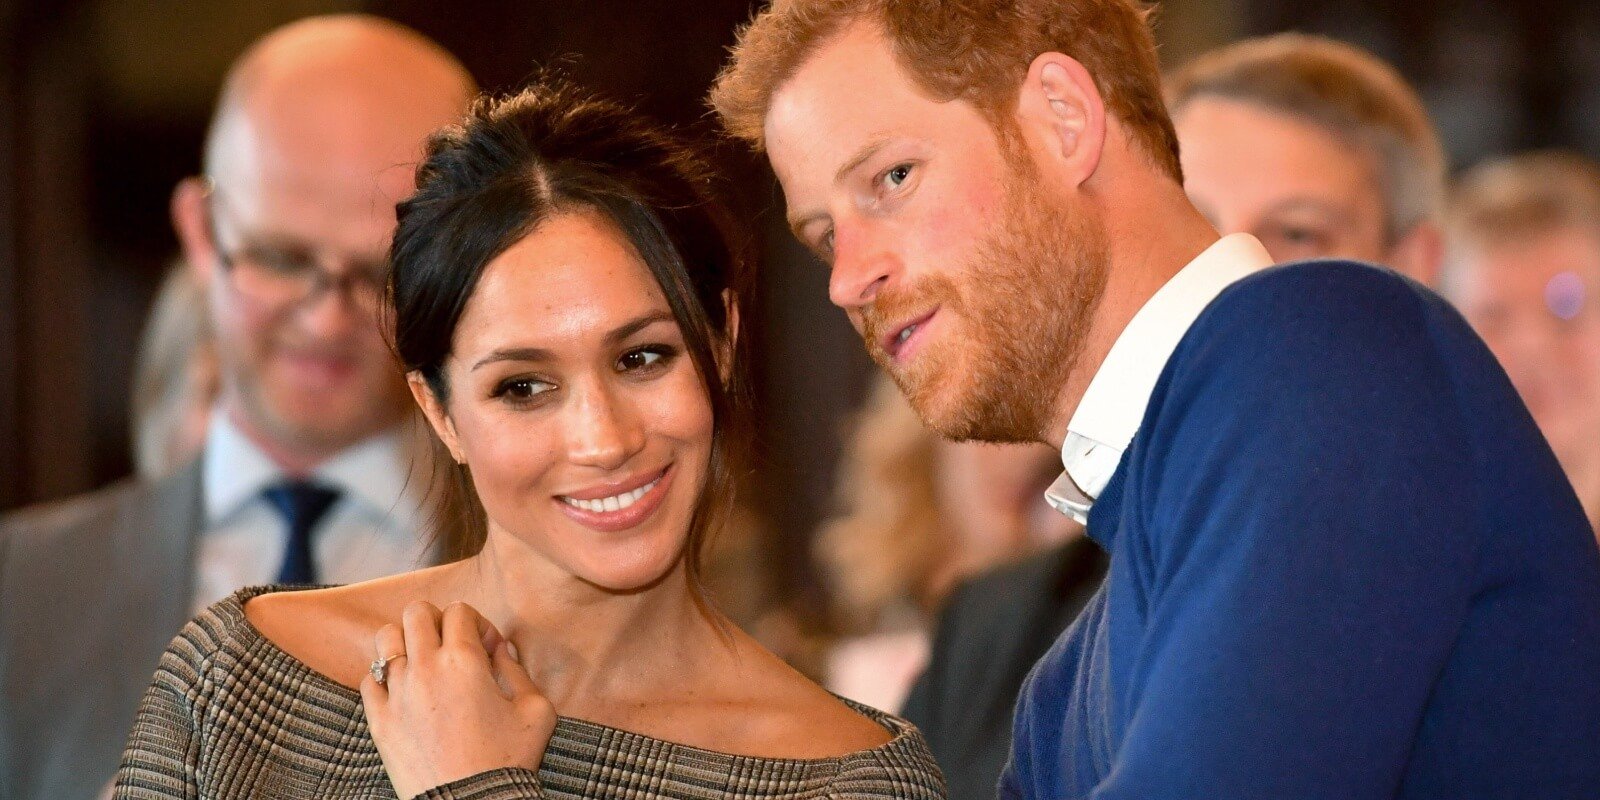 Meghan Markle and Prince Harry pose for a photograph taken in 2018.